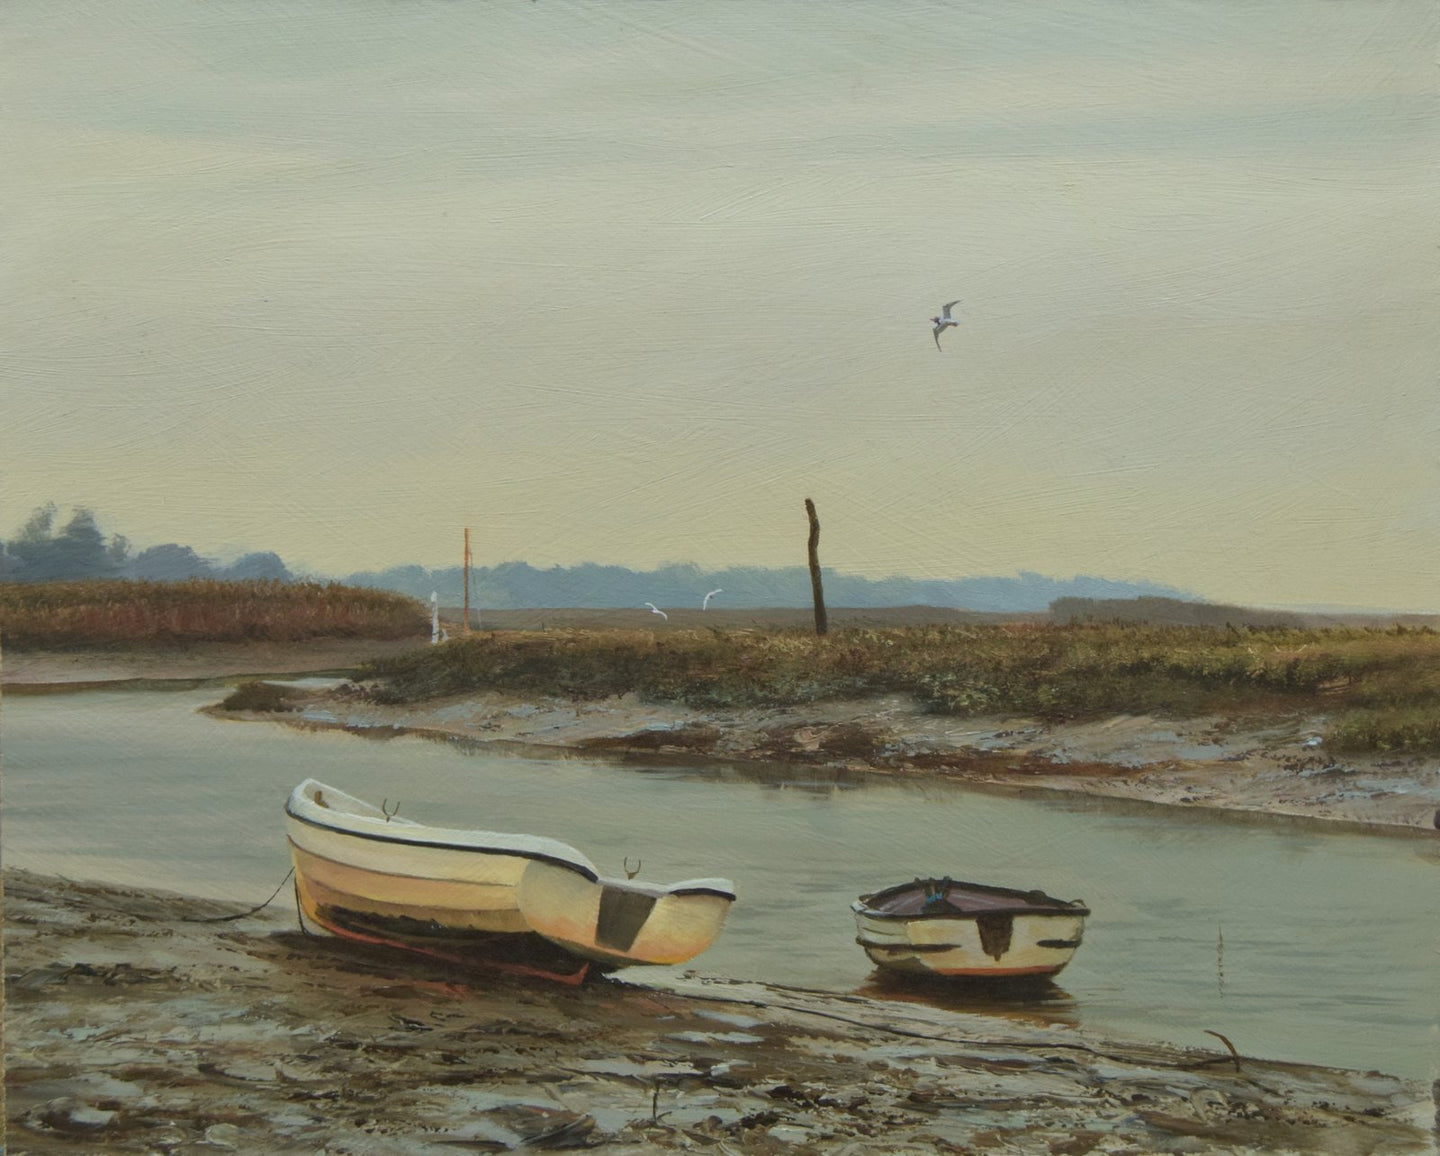 Two boats on the mud at the Norfolk harbour, with a greyish sky and three guls on the wing.